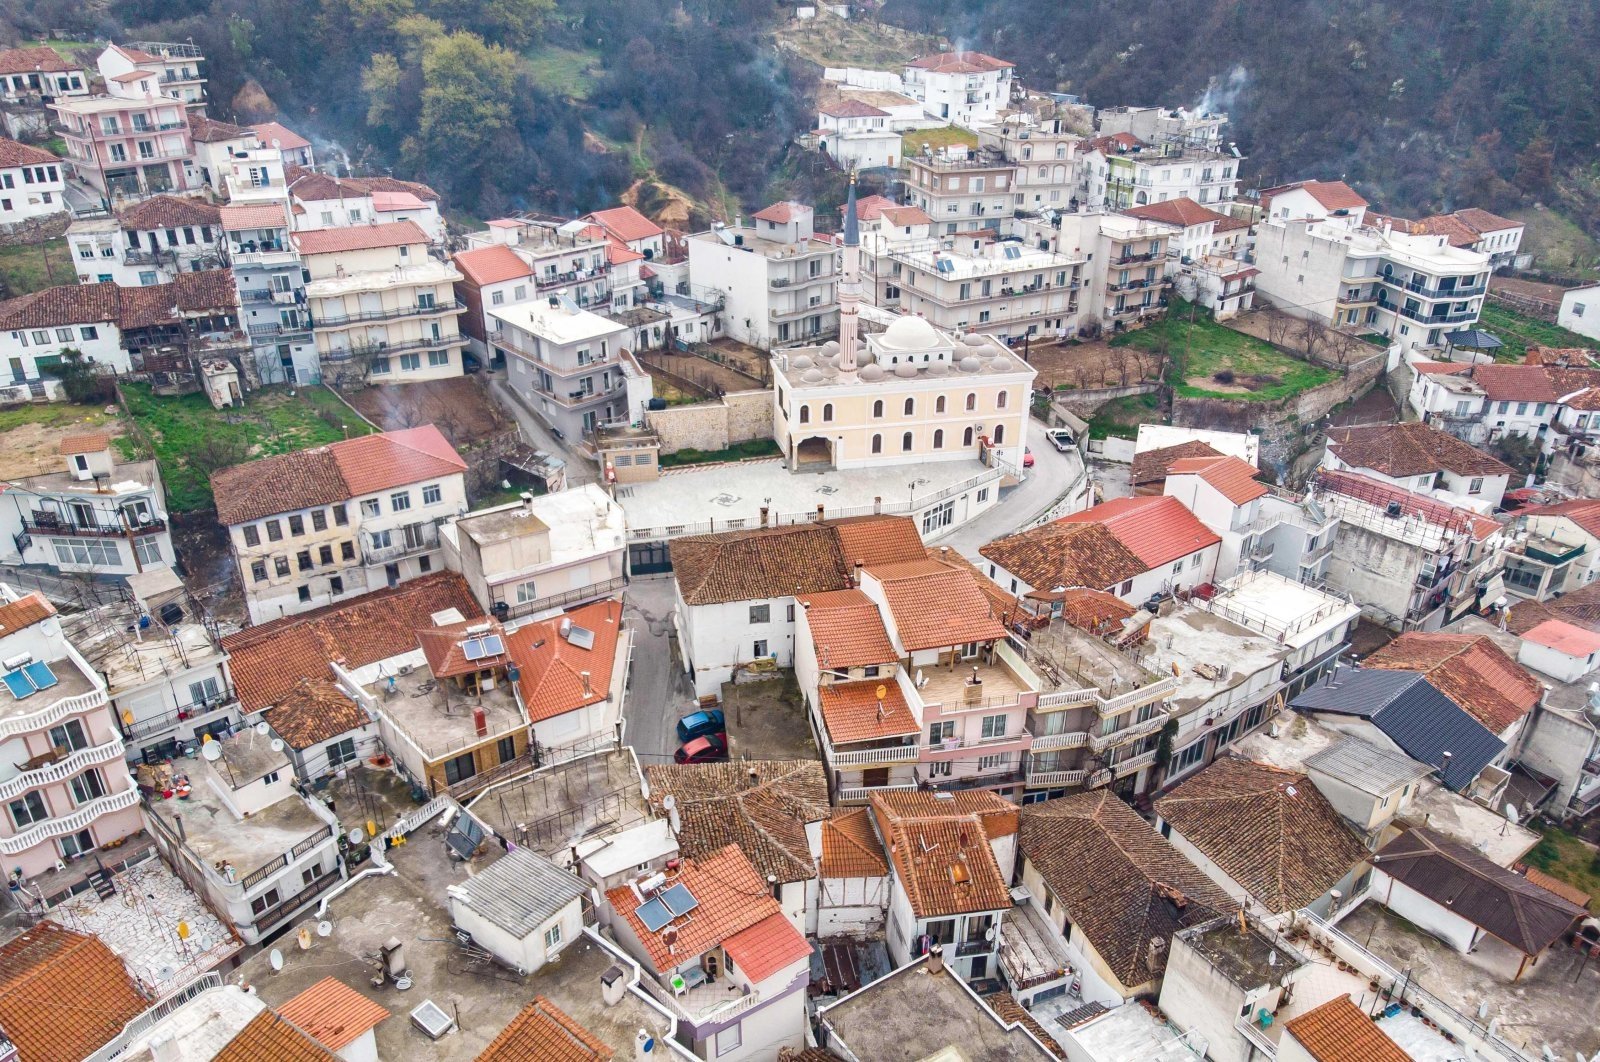 An aerial view of Echinos village in Greece, March 31, 2020. (Getty Images)